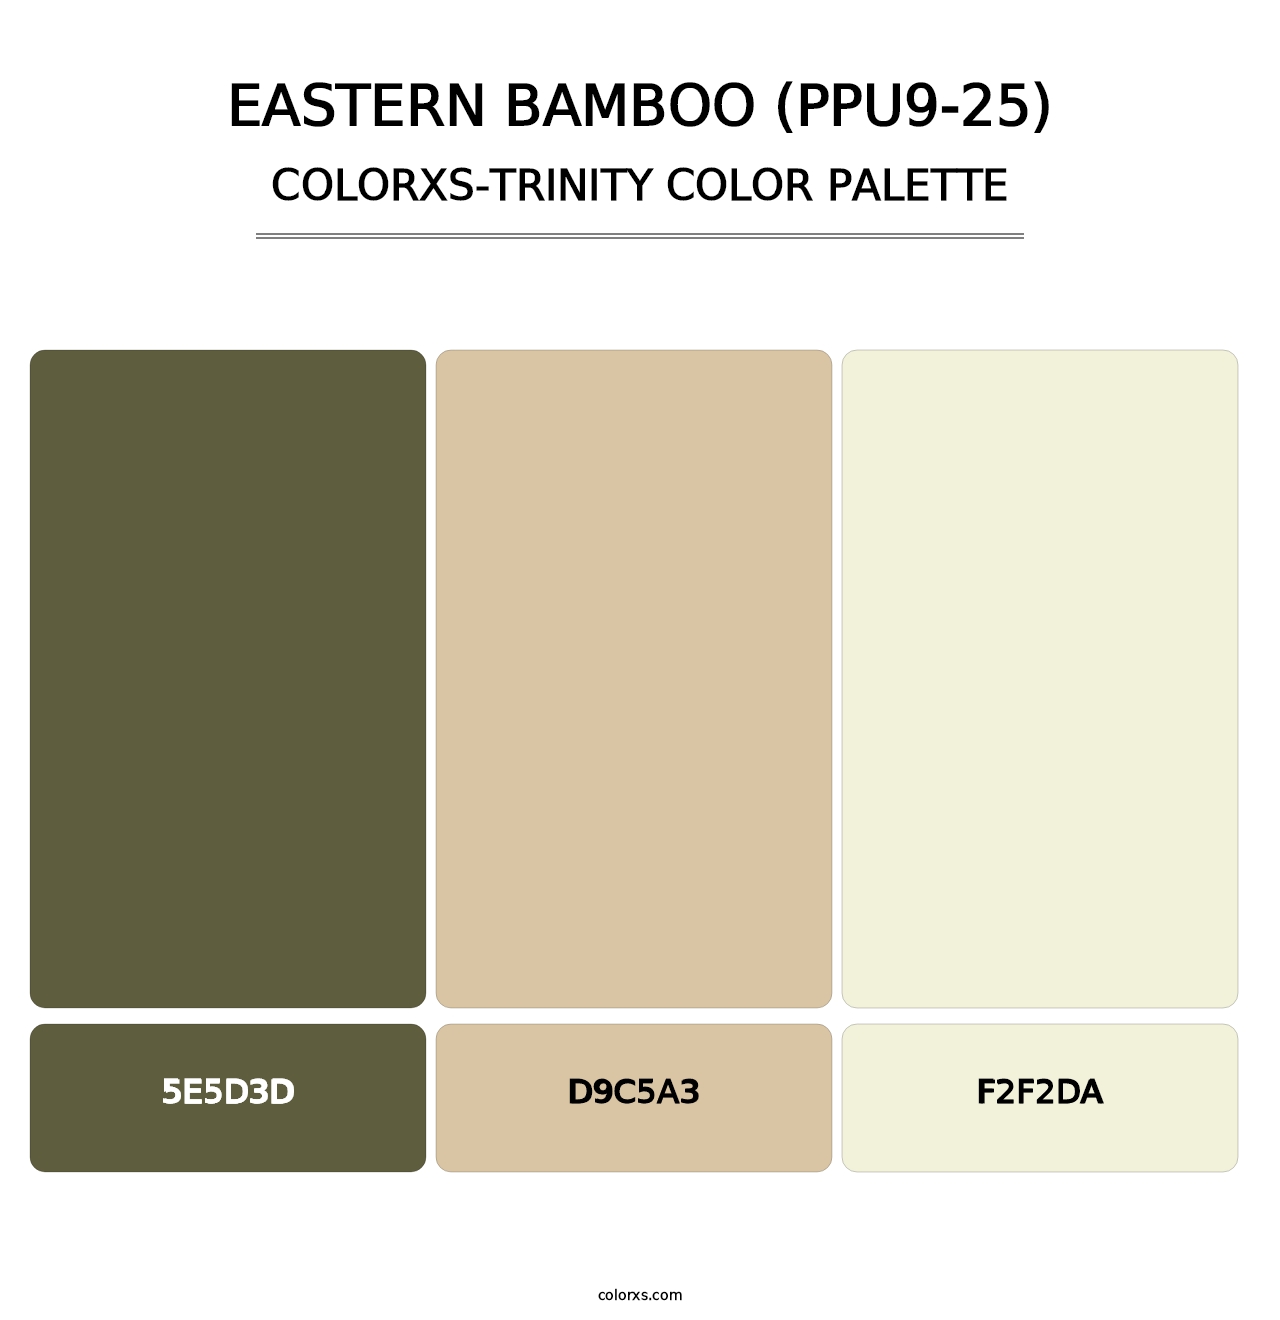 Eastern Bamboo (PPU9-25) - Colorxs Trinity Palette